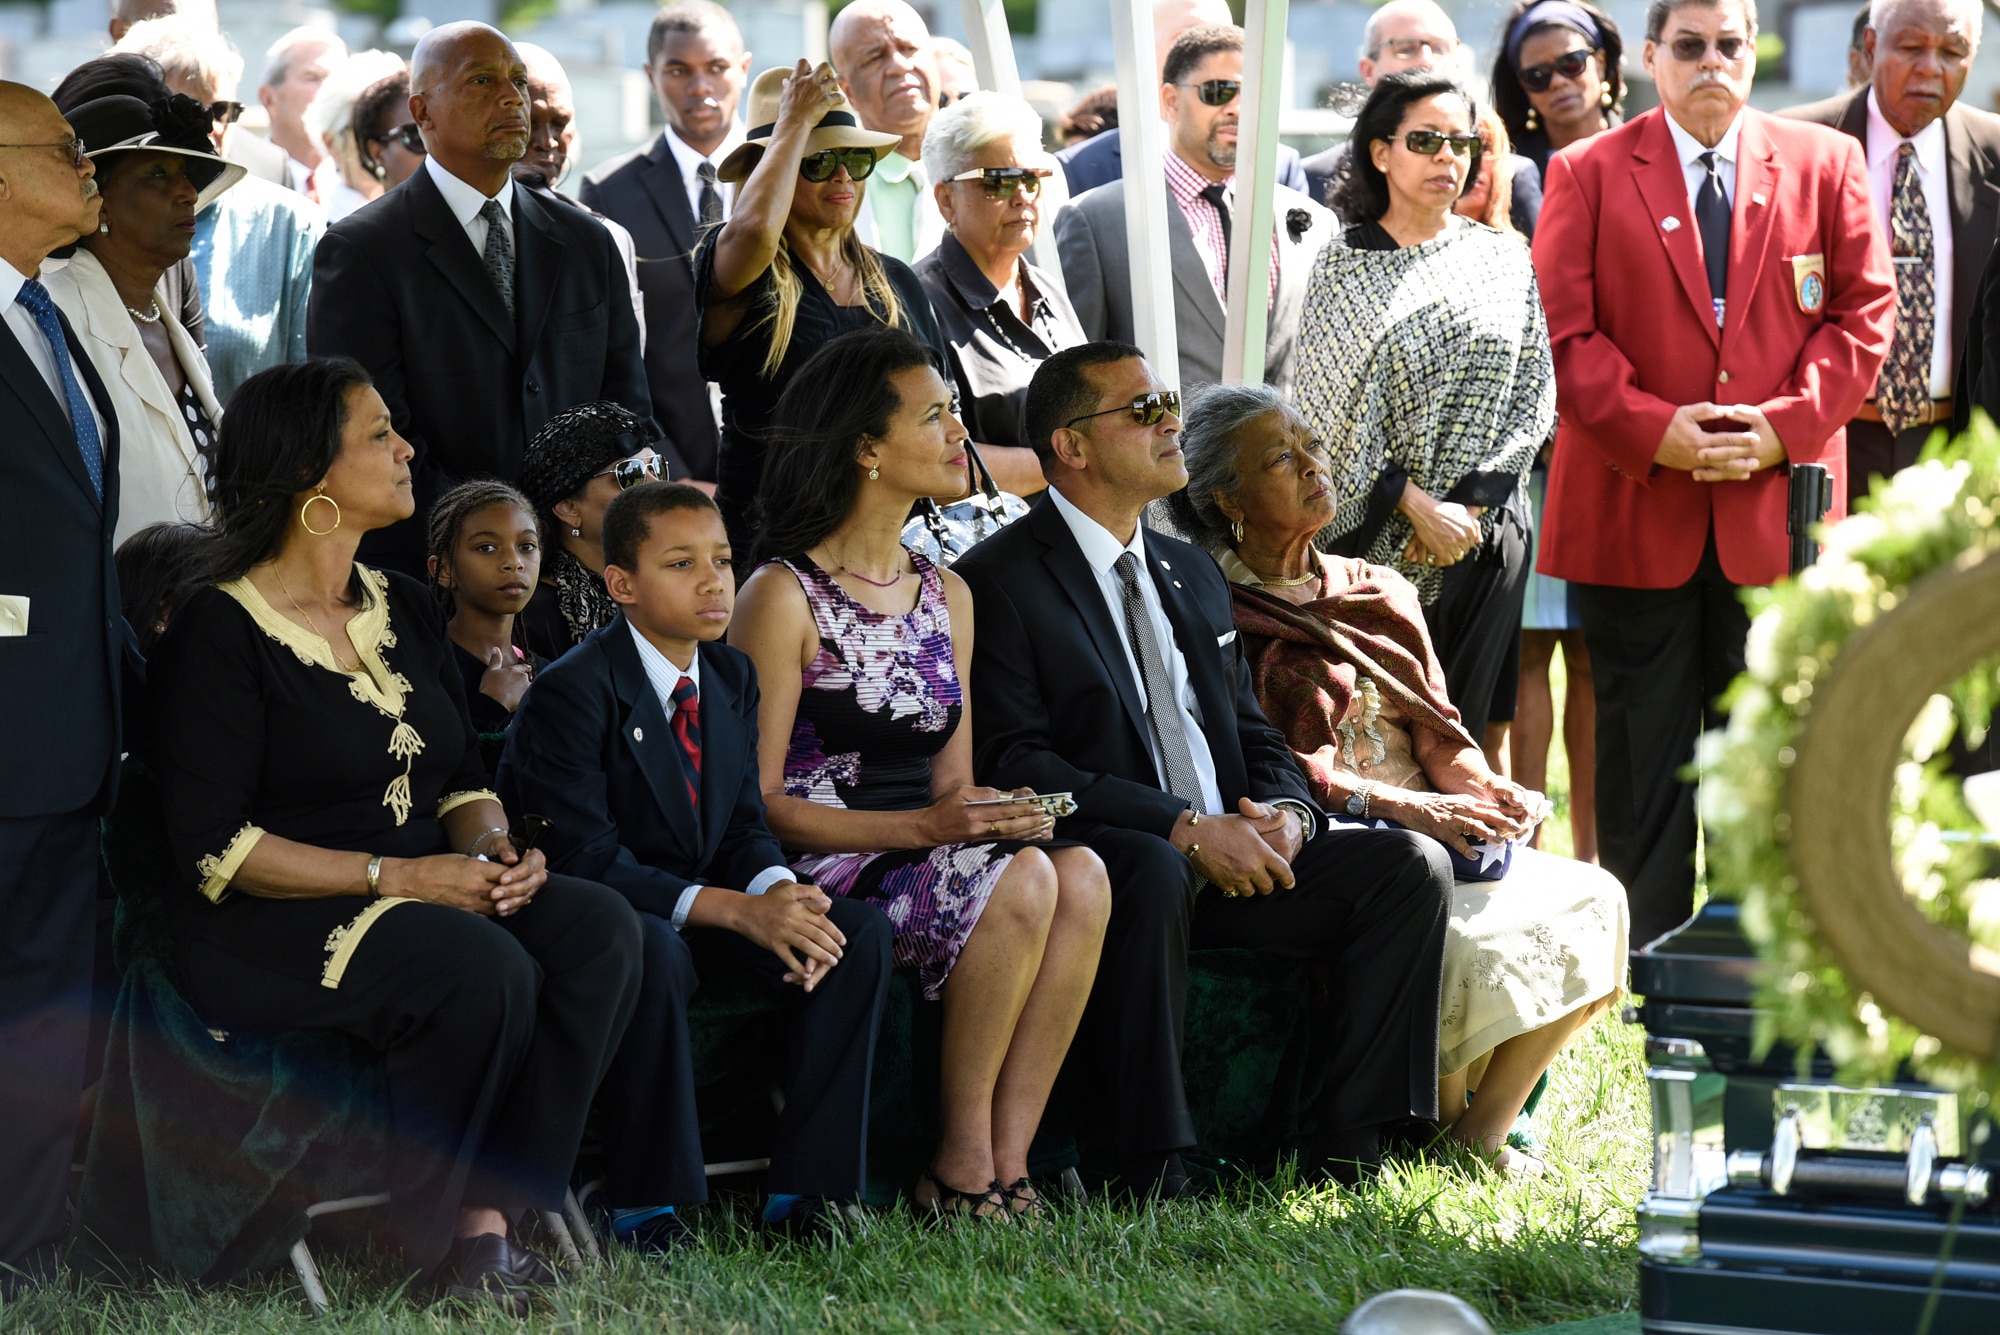 Former 2nd Lt. Malvin G. Whitfield’s family and friends attended his graveside service at Arlington National Cemetery, Va., June 8, 2016. Whitfield served in the Army Air Forces as a Tuskegee Airman during World War II and then in the Air Force during the Korean War. He is survived by his daughters Nyna Konishi and Fredricka Whitfield, son Malvin Whitfield Jr., and wife Nola Whitfield. (U.S. Air Force photo/Staff Sgt. Alyssa C. Gibson)